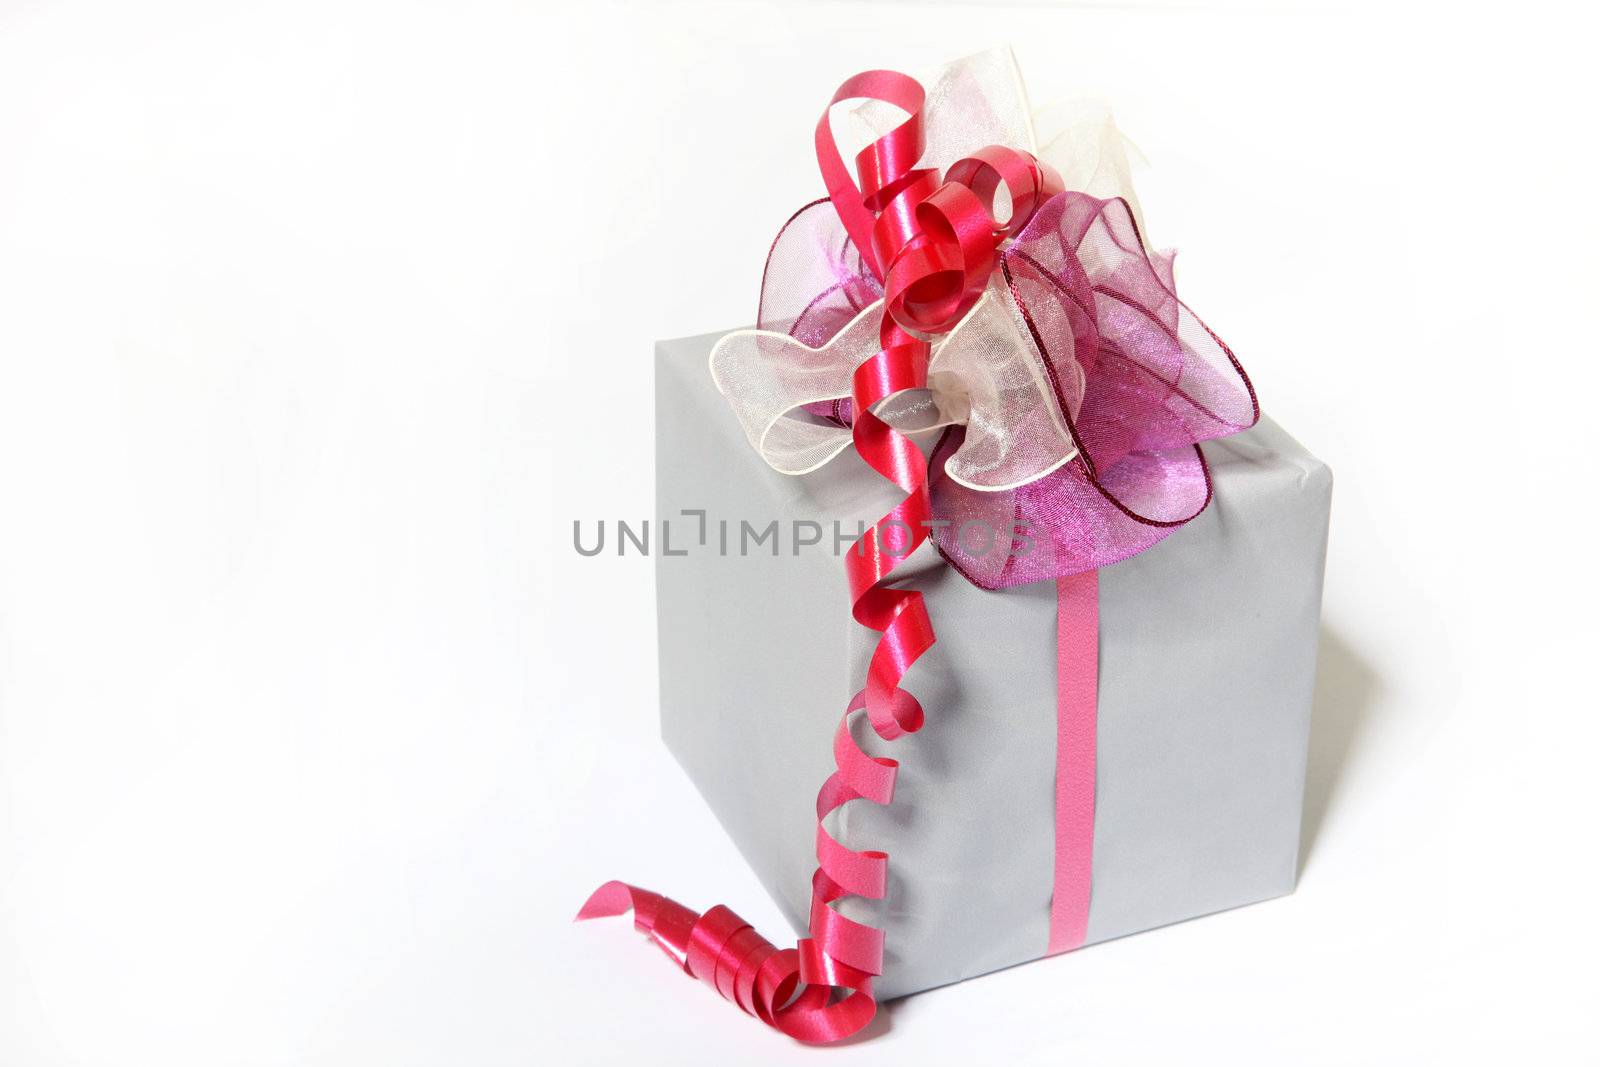 A beautifully wrapped gift with bow on white background